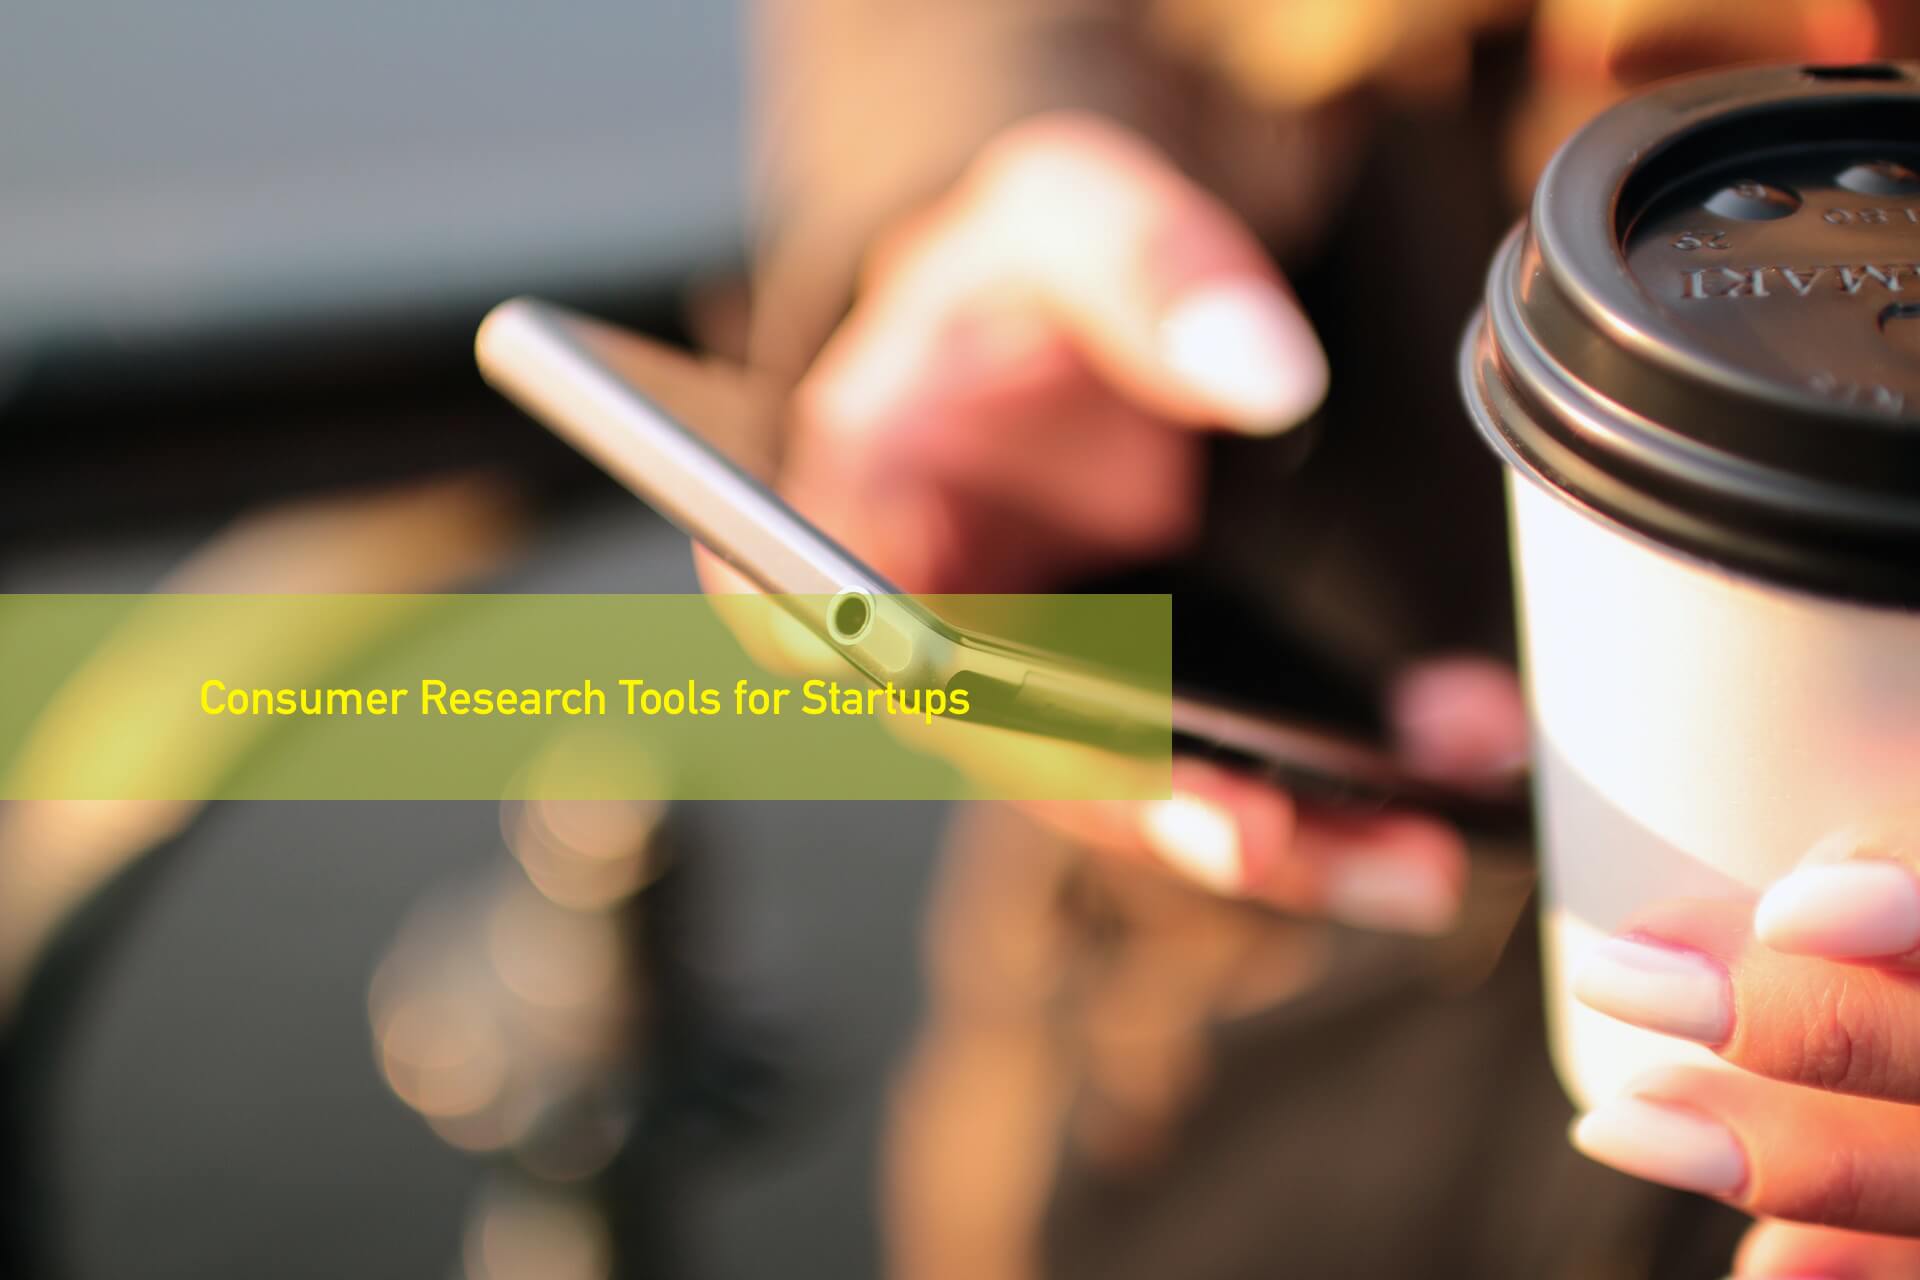 Consumer Research Tools for Startups